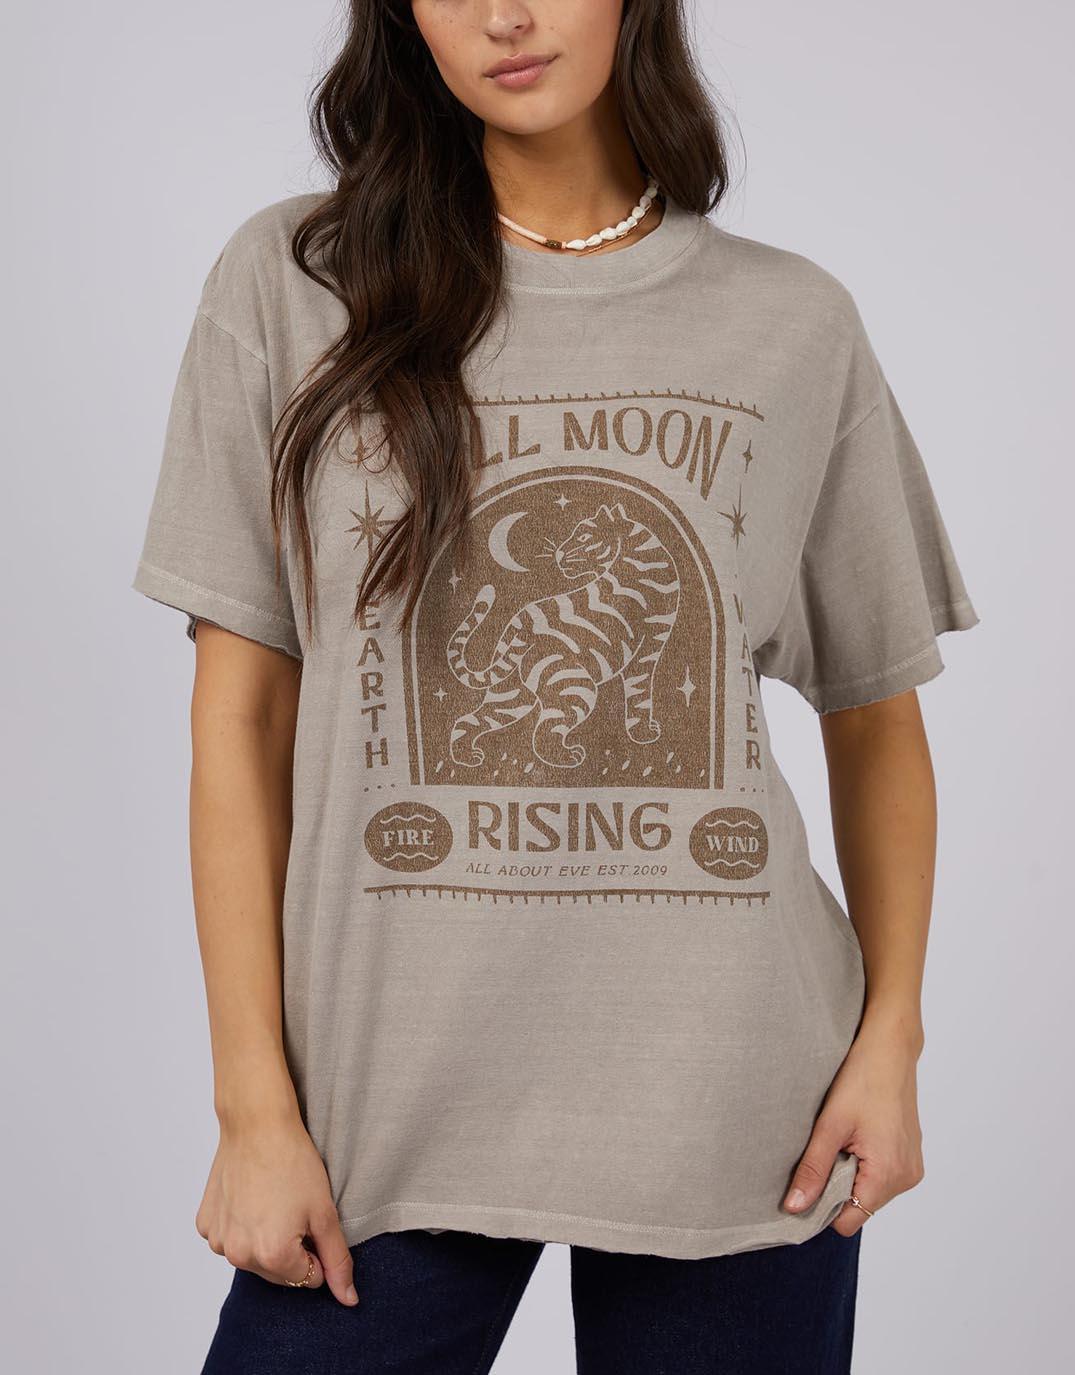 All About Eve - Rising Tee - Grey - White & Co Living Tees & Tanks